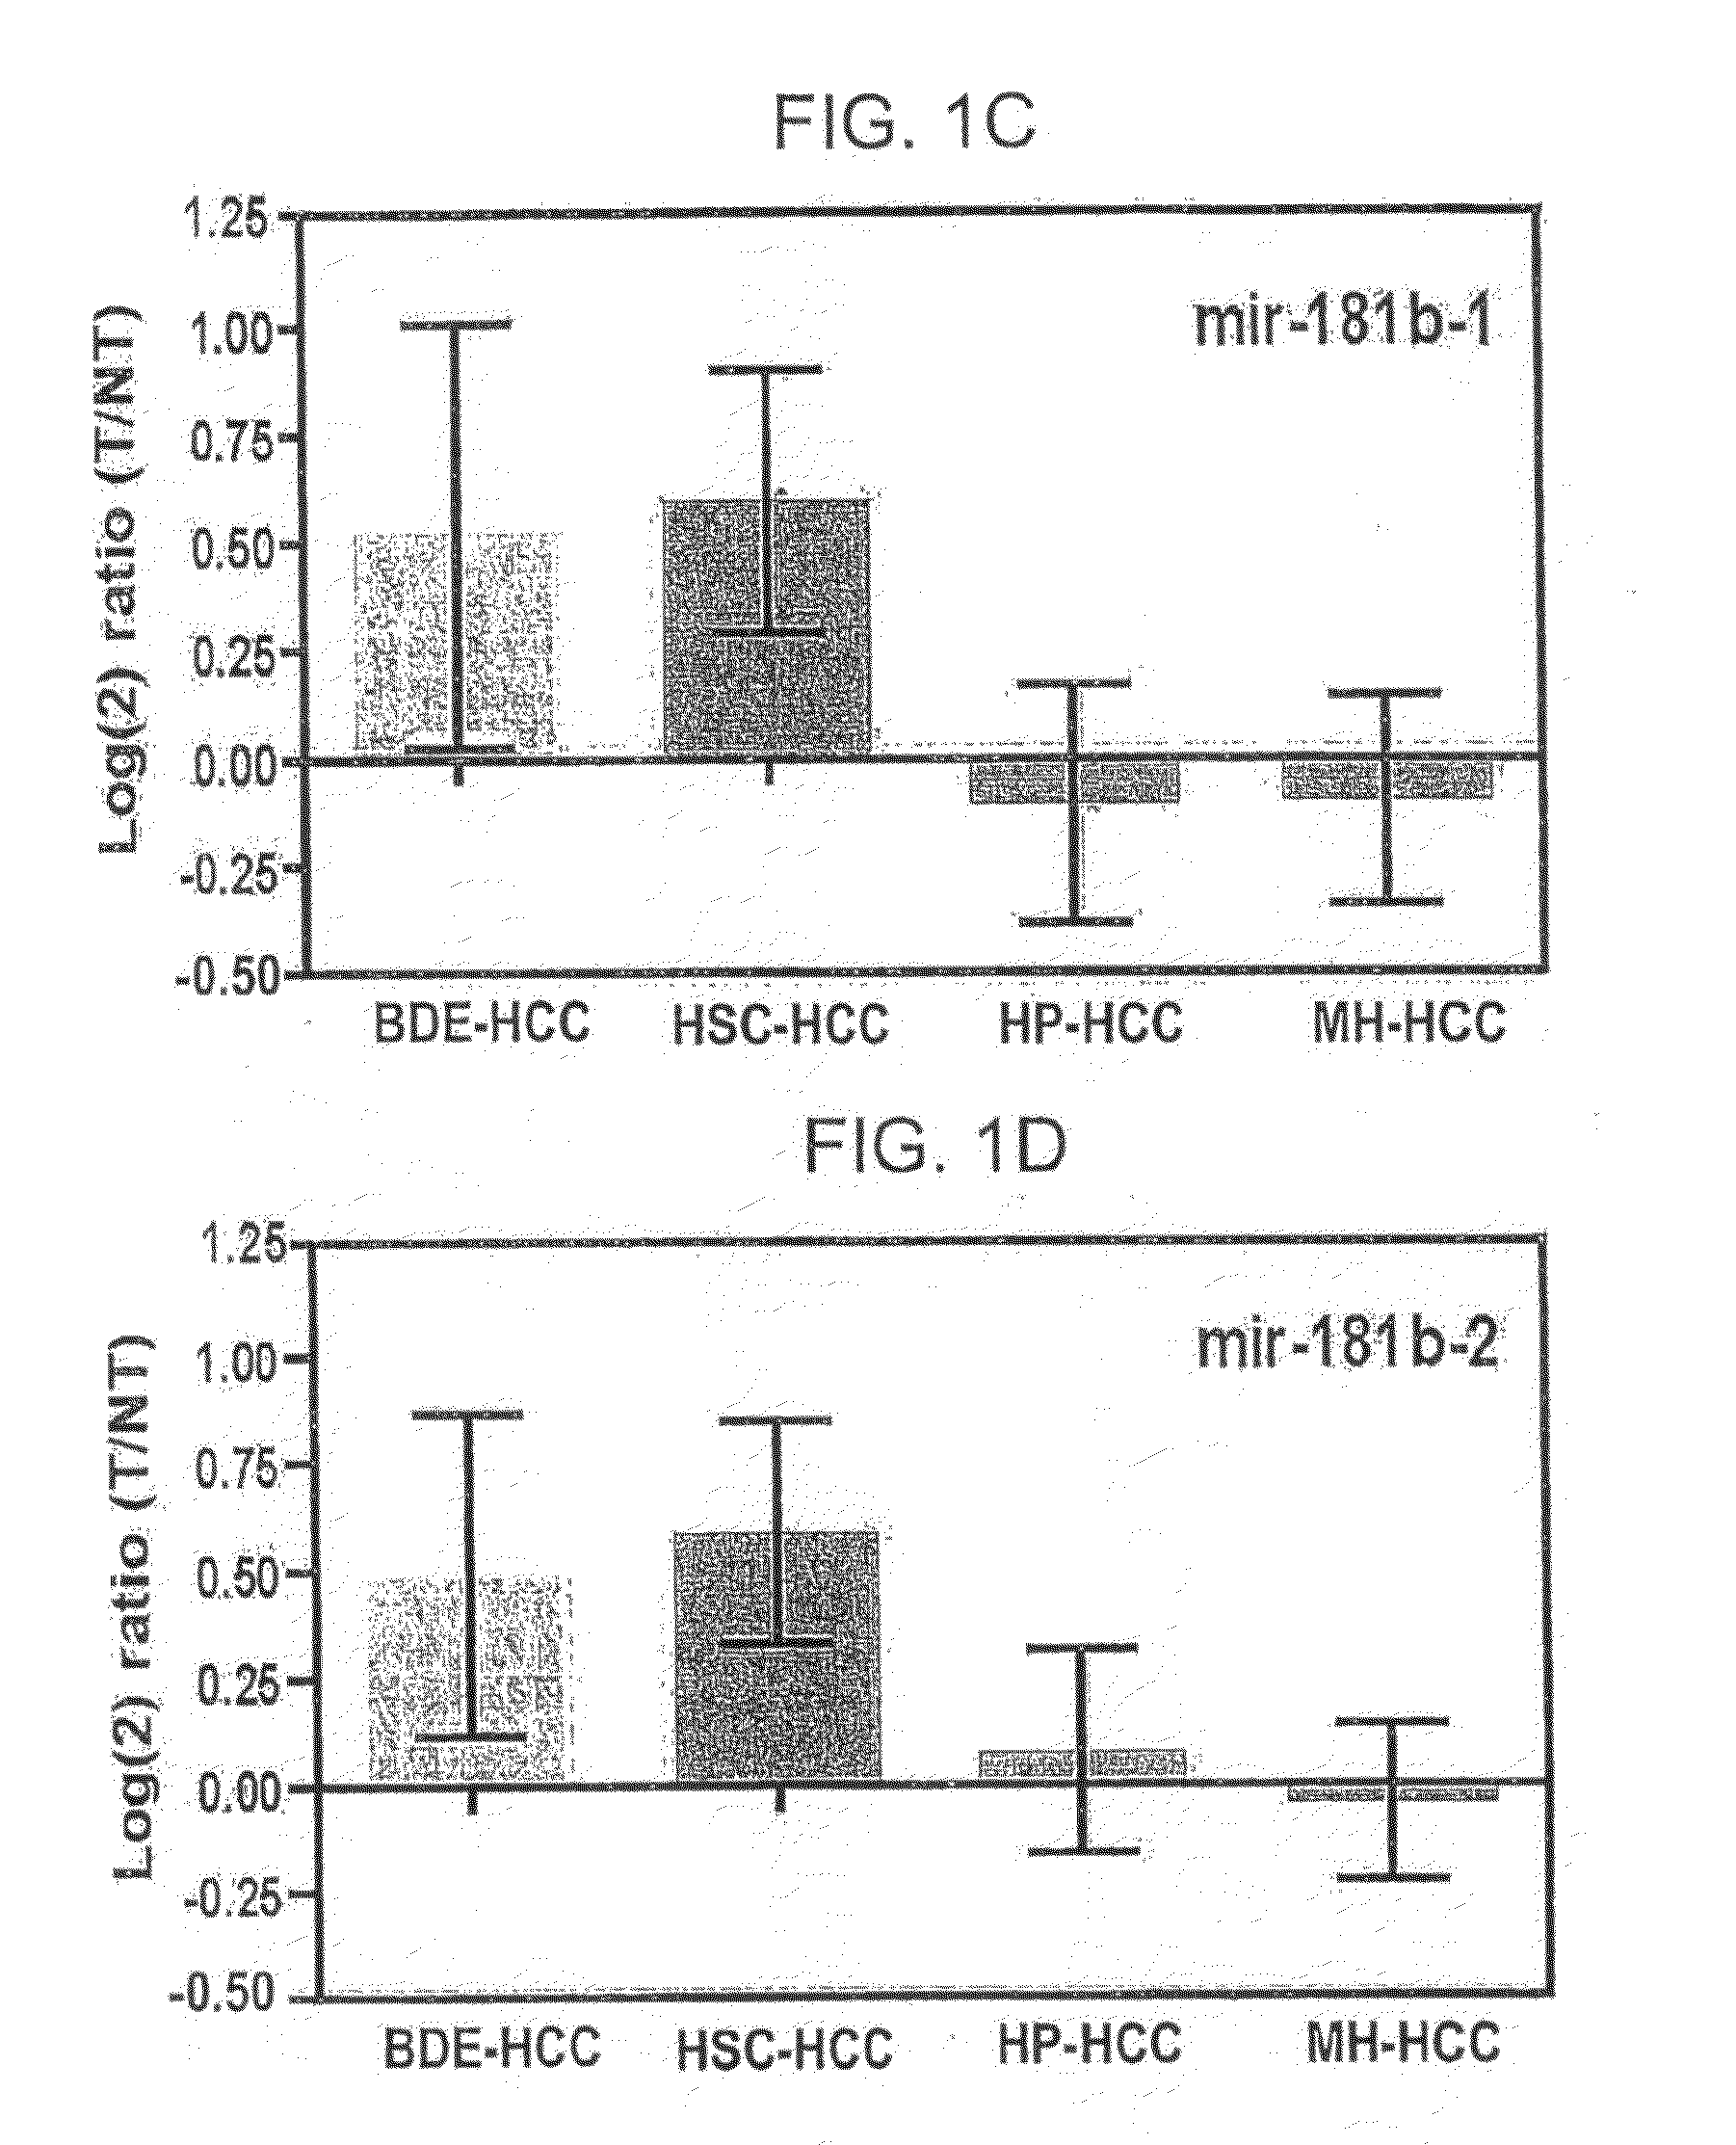 Methods for Determining Heptocellular Carcinoma Subtype and Detecting Hepatic Cancer Stem Cells